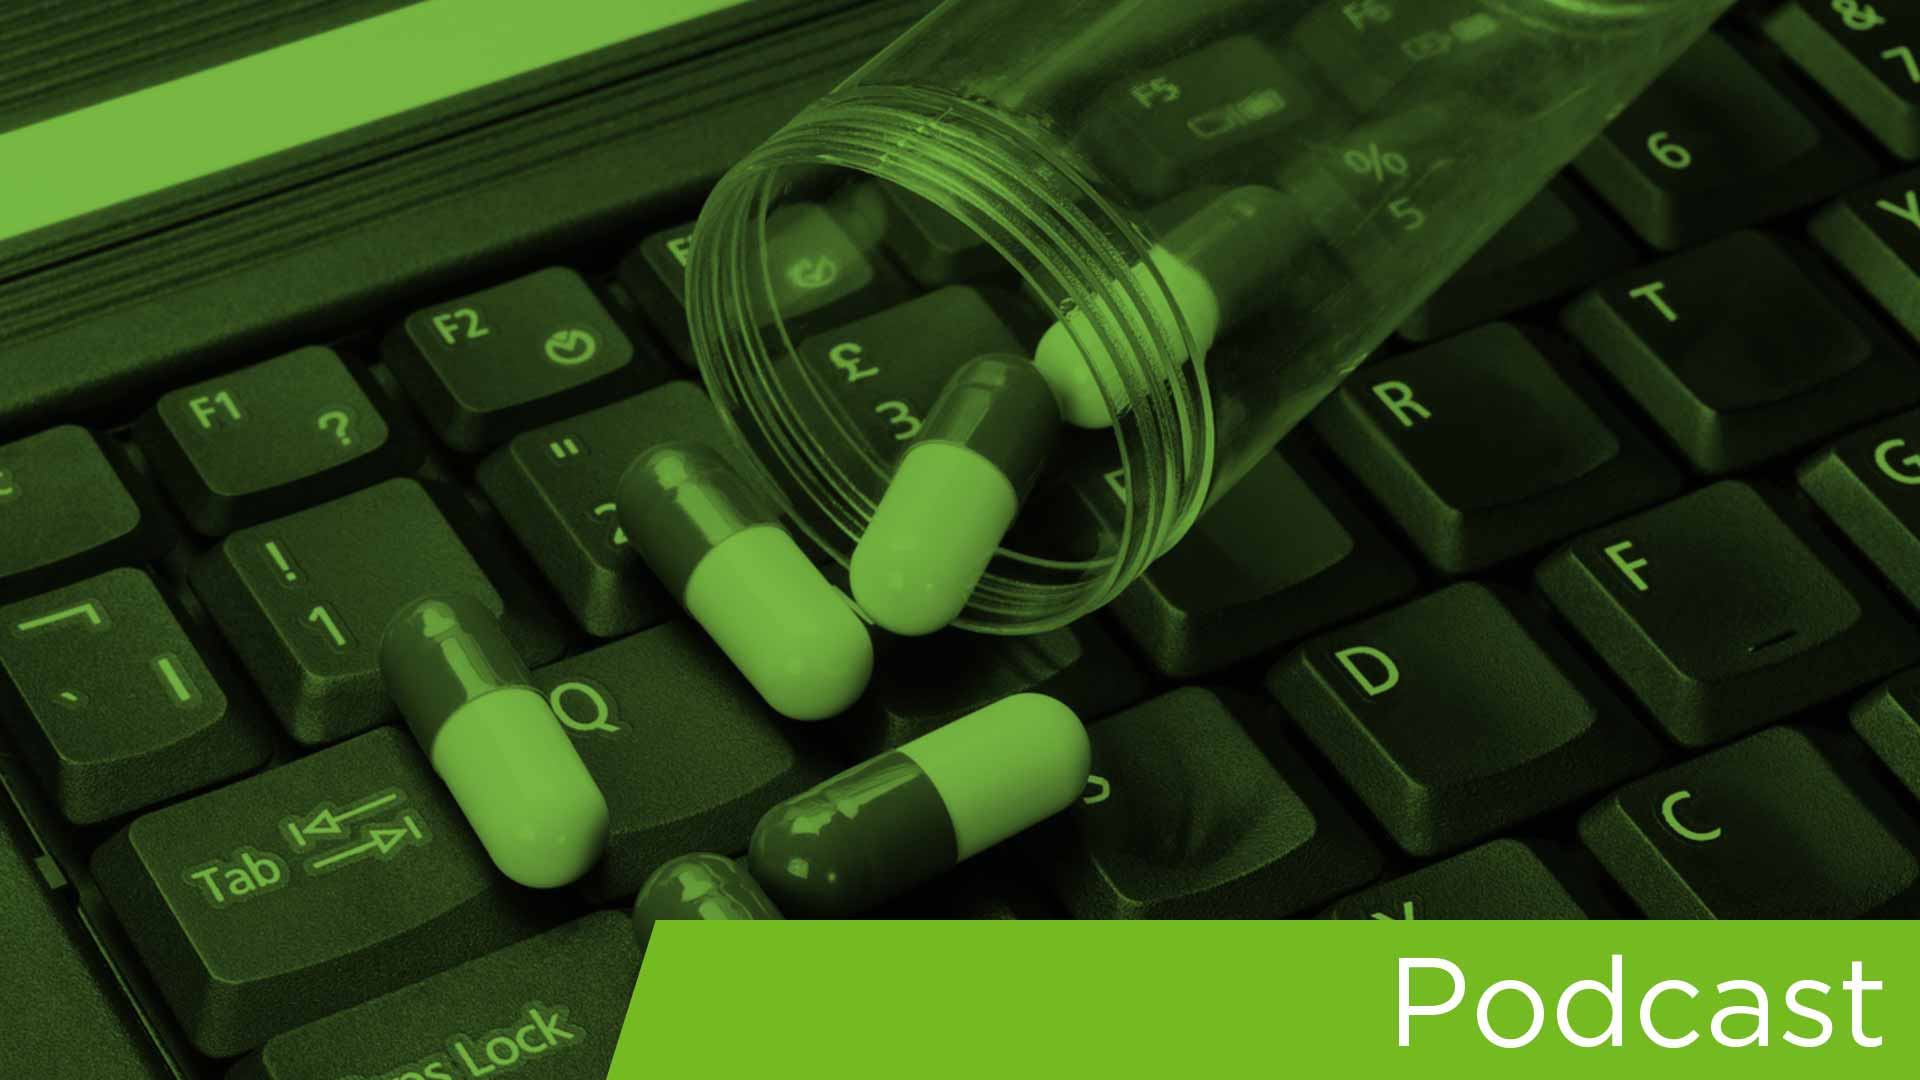 podcast image_pills on keyboard_green overlay